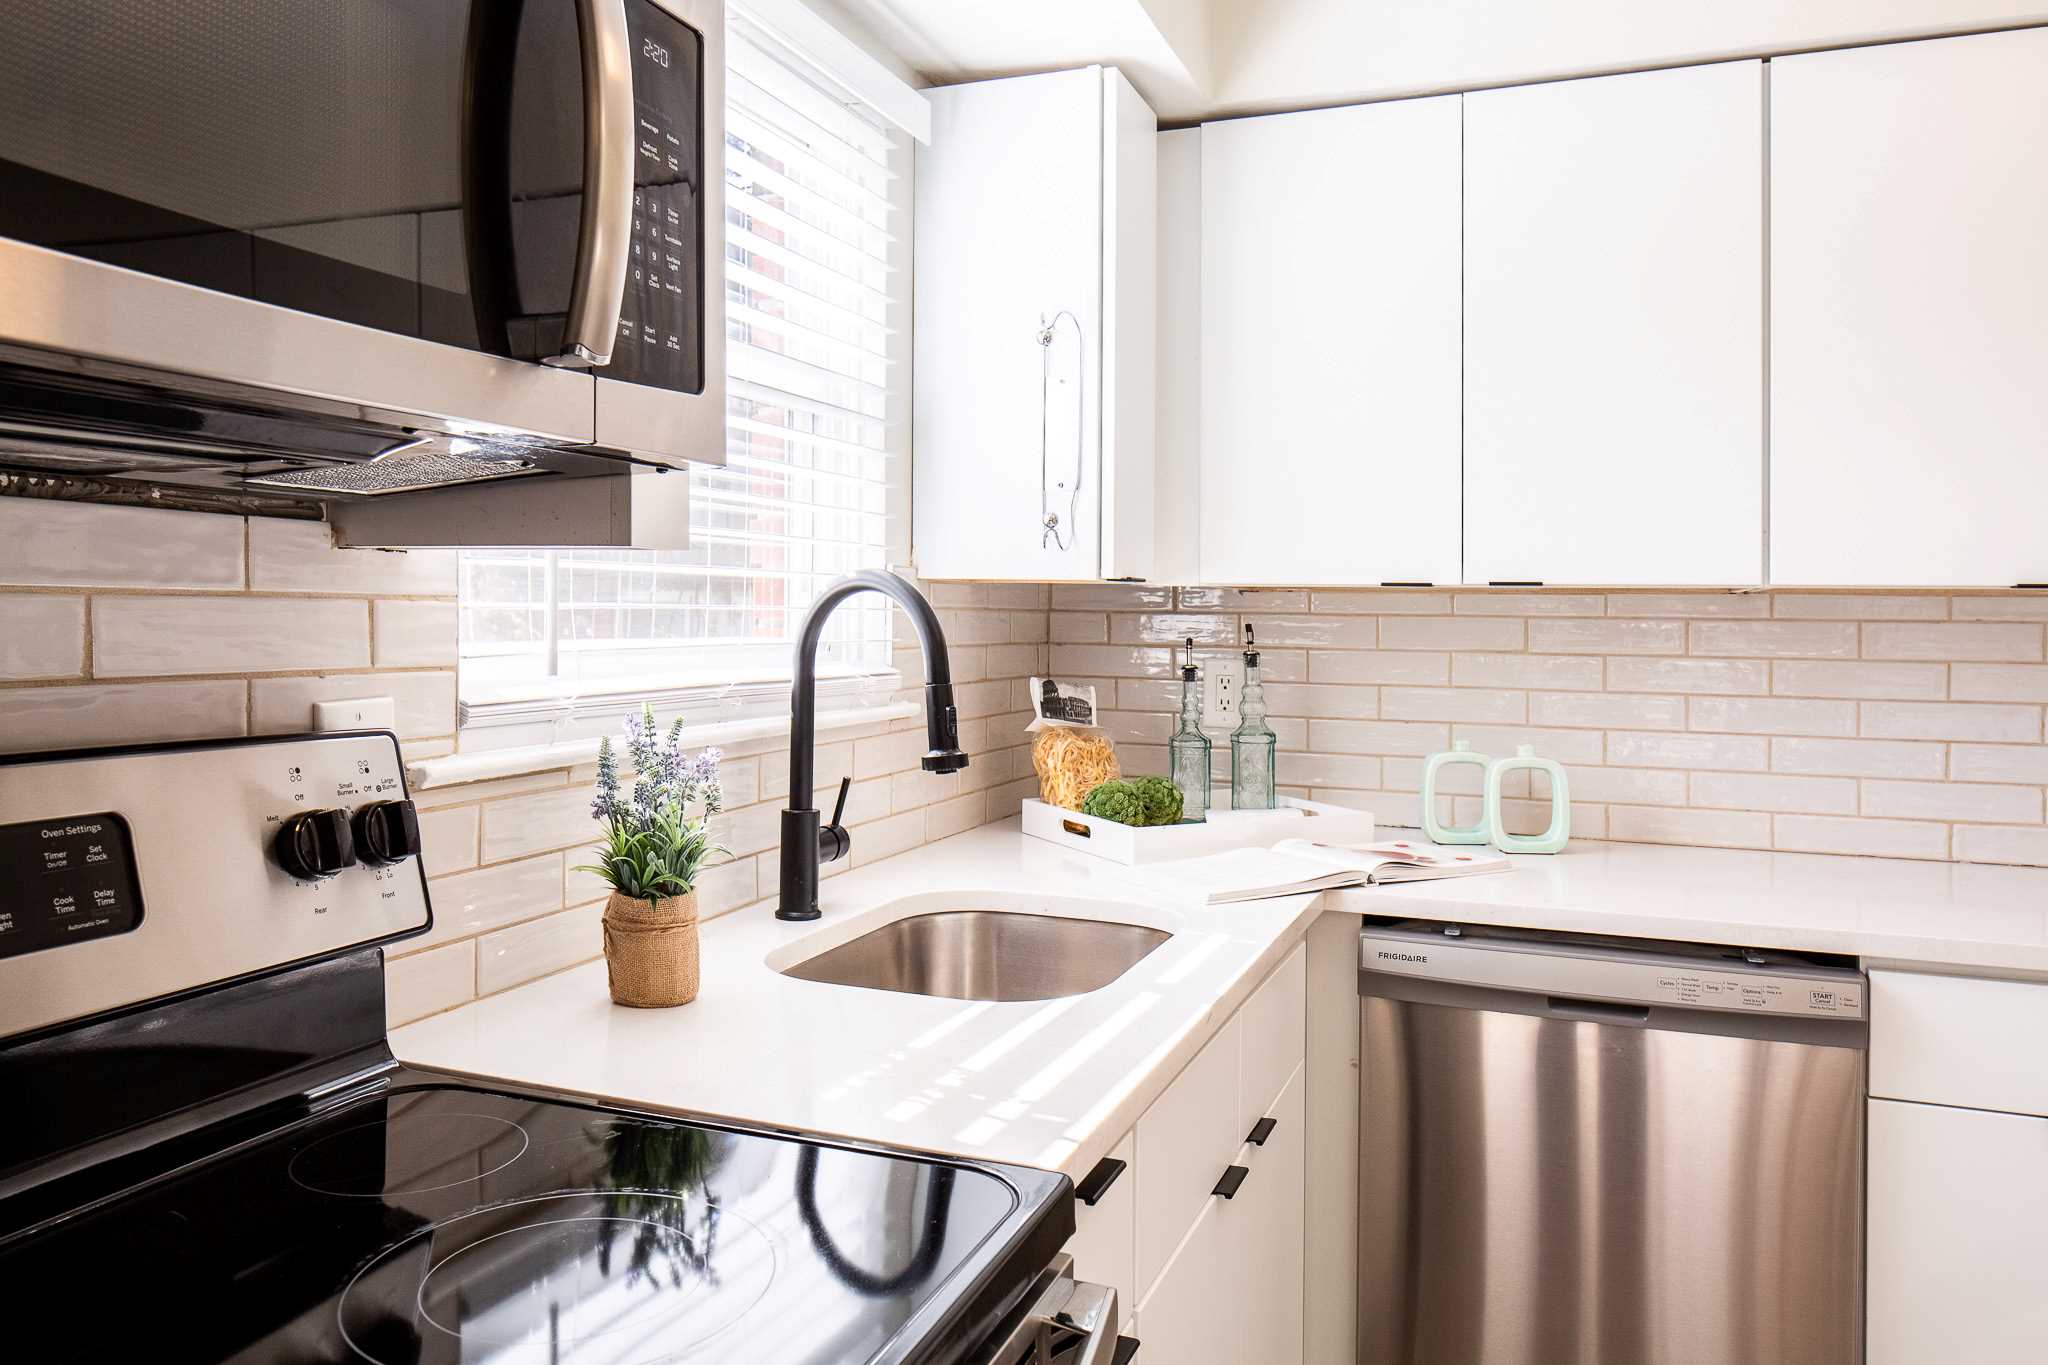 Upgraded kitchen at Somerville Gardens Apartments in Somerville, New Jersey